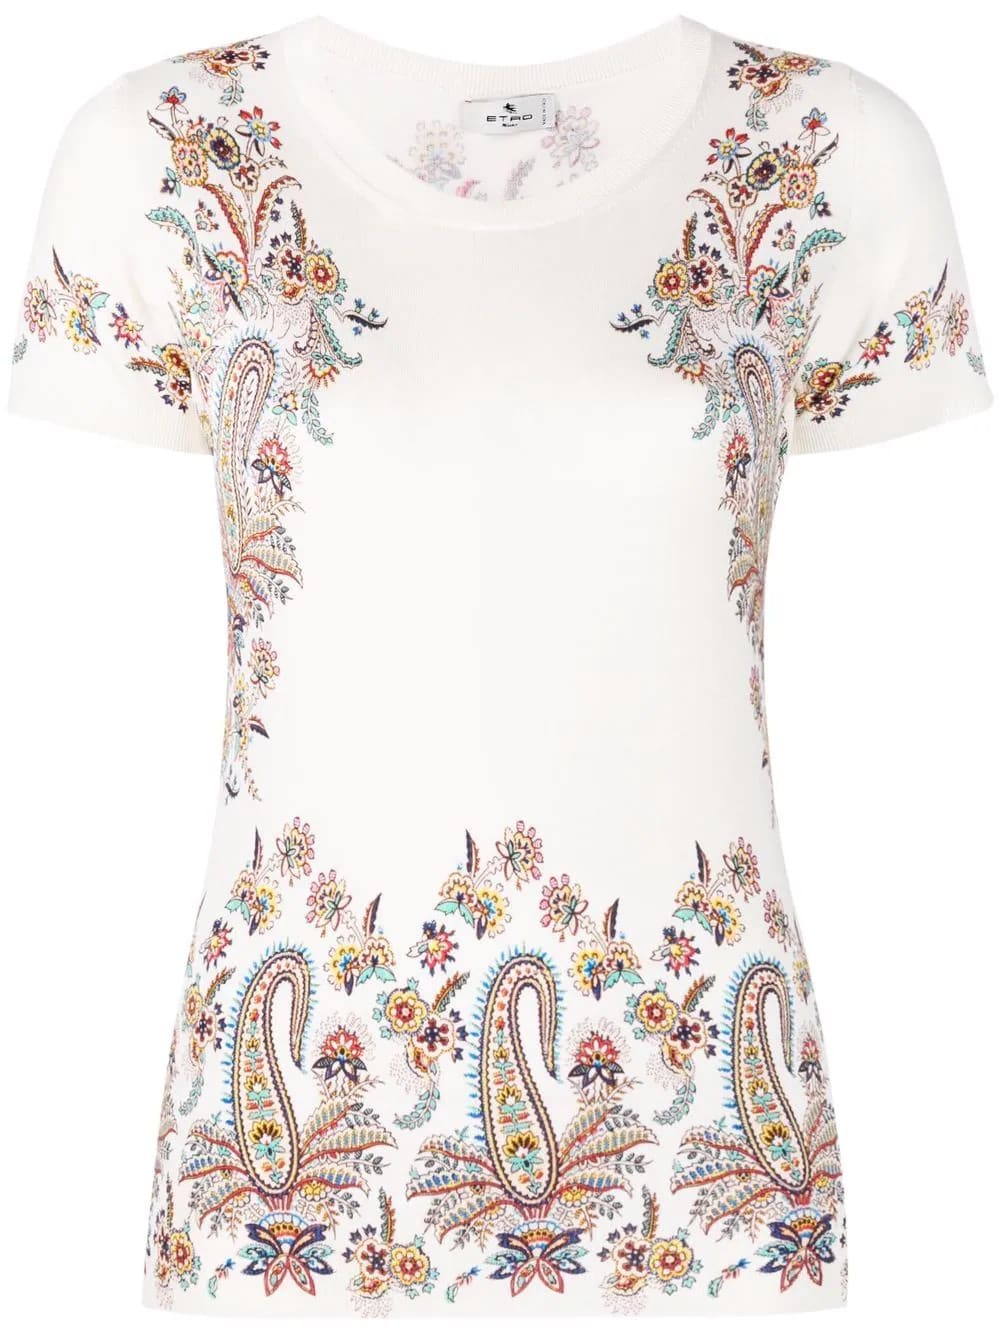 Etro Woman White Short Sleeve Shirt With Floral Paisley Print